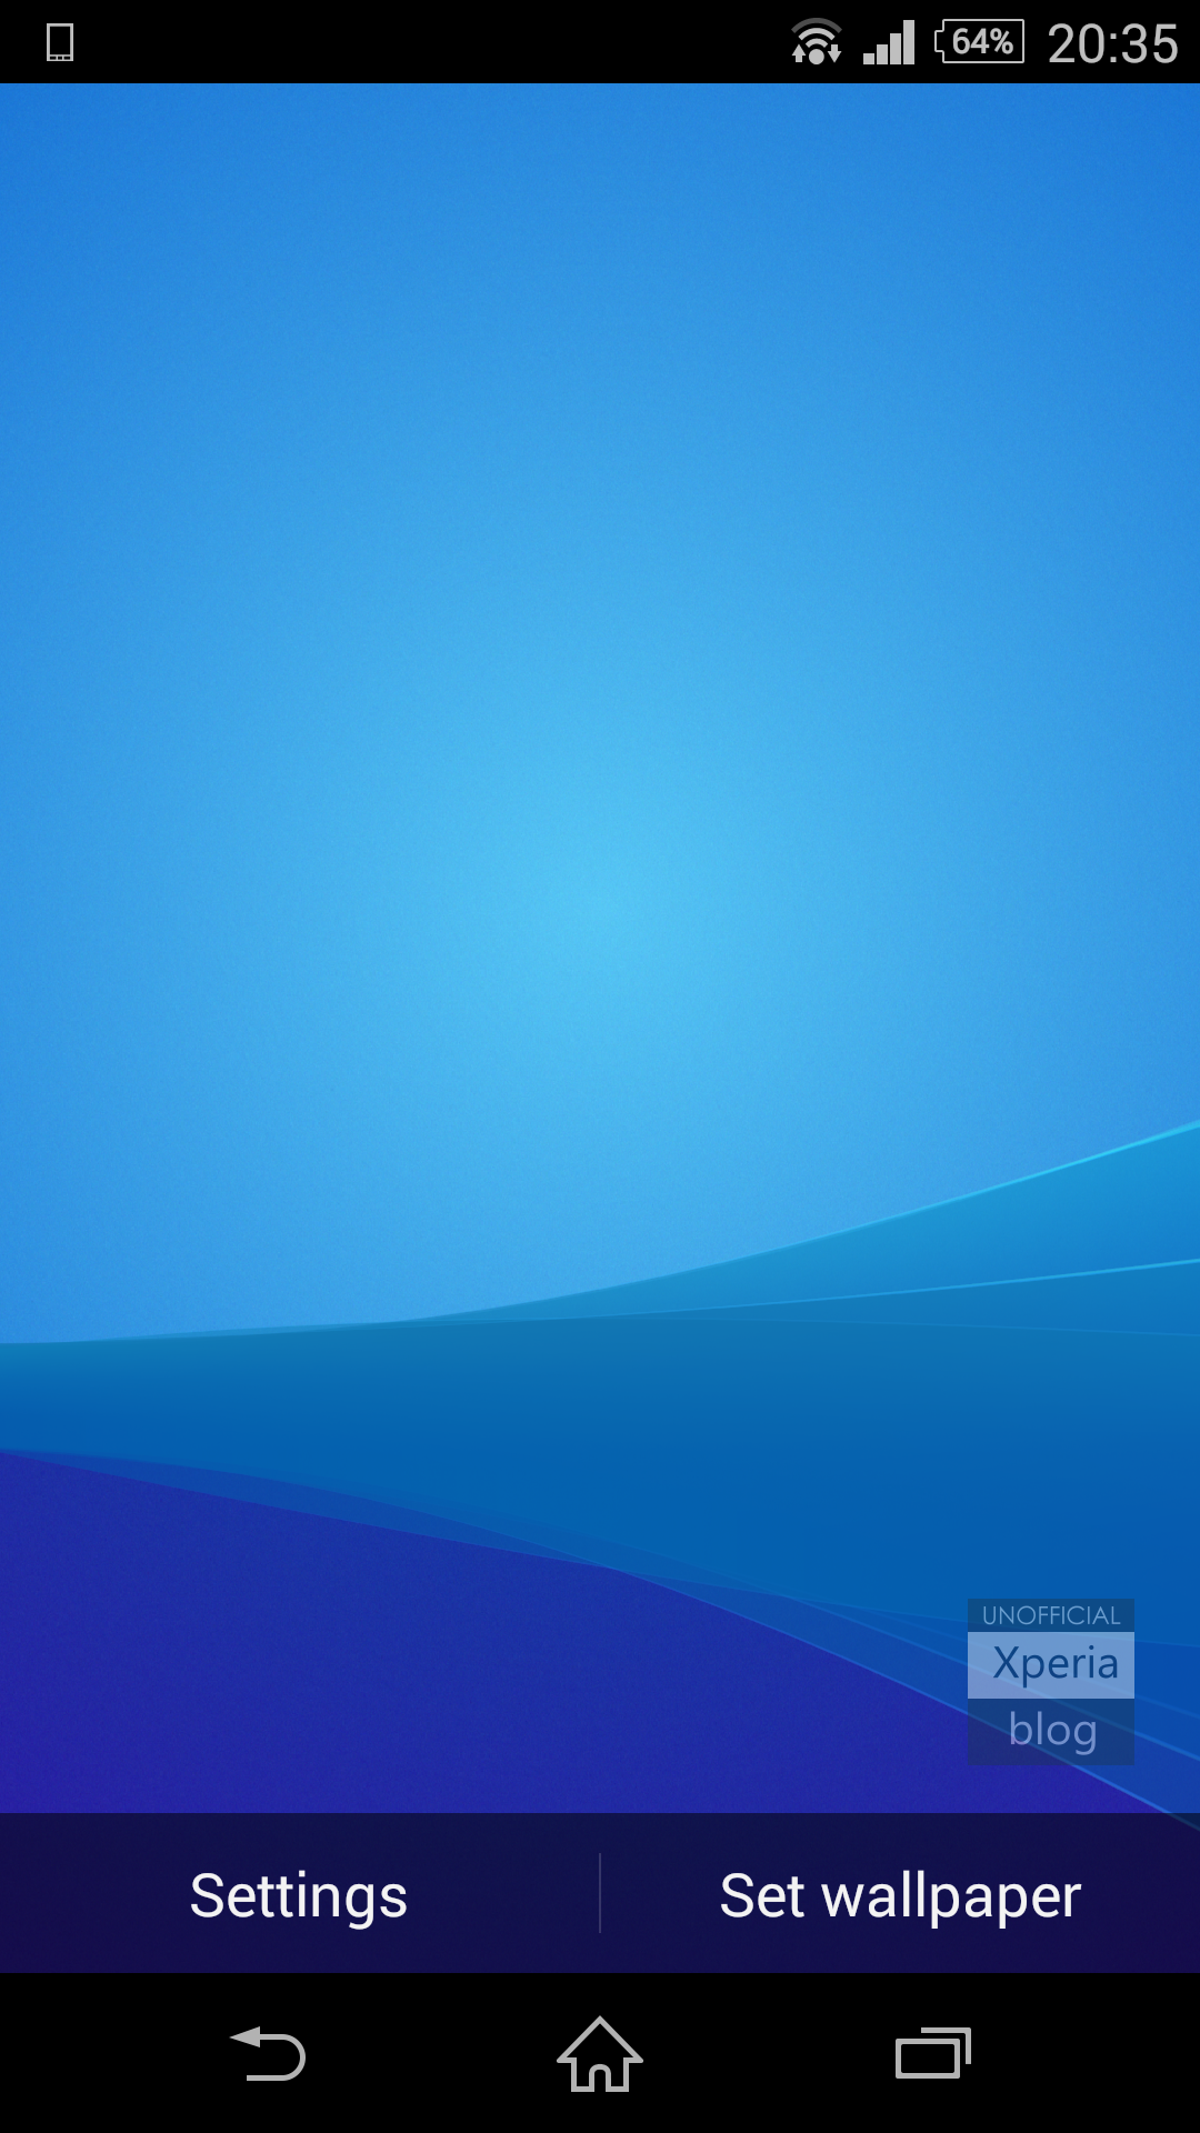 Xperia Z3 Plus Live Wallpaper Now Available For All Xperia Blog